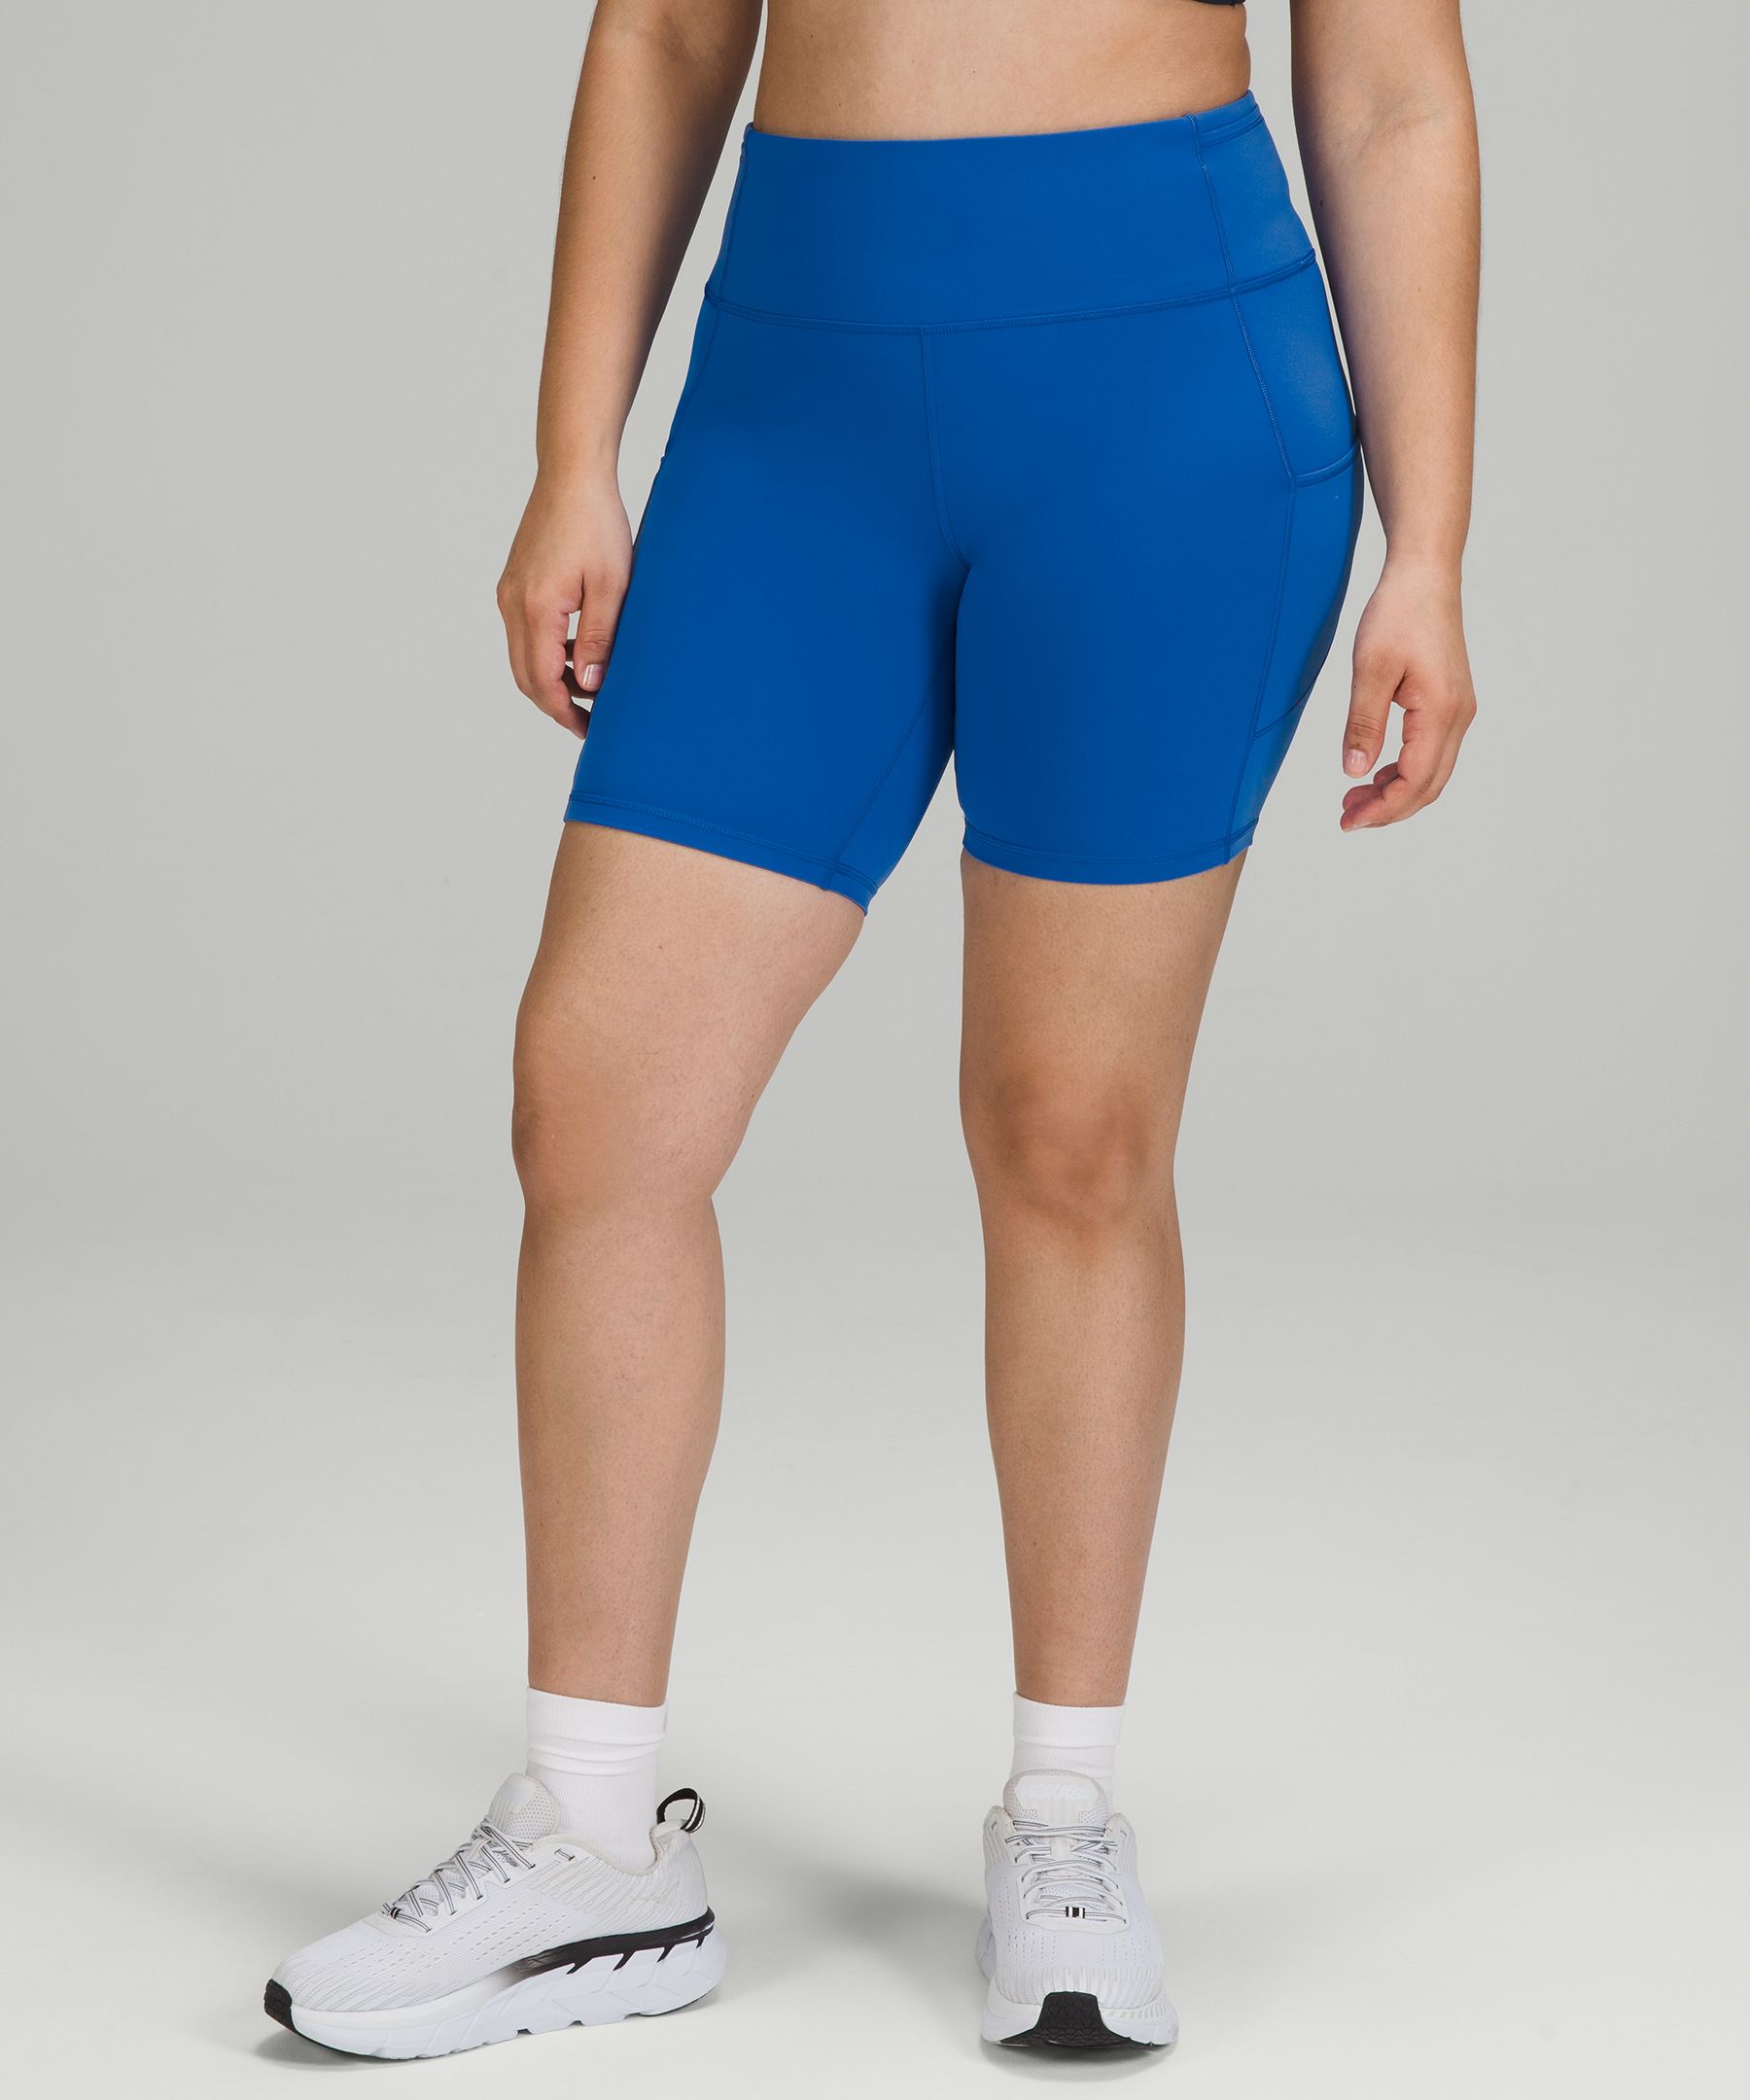 Fast and Free High-Rise Short 8, Women's Shorts